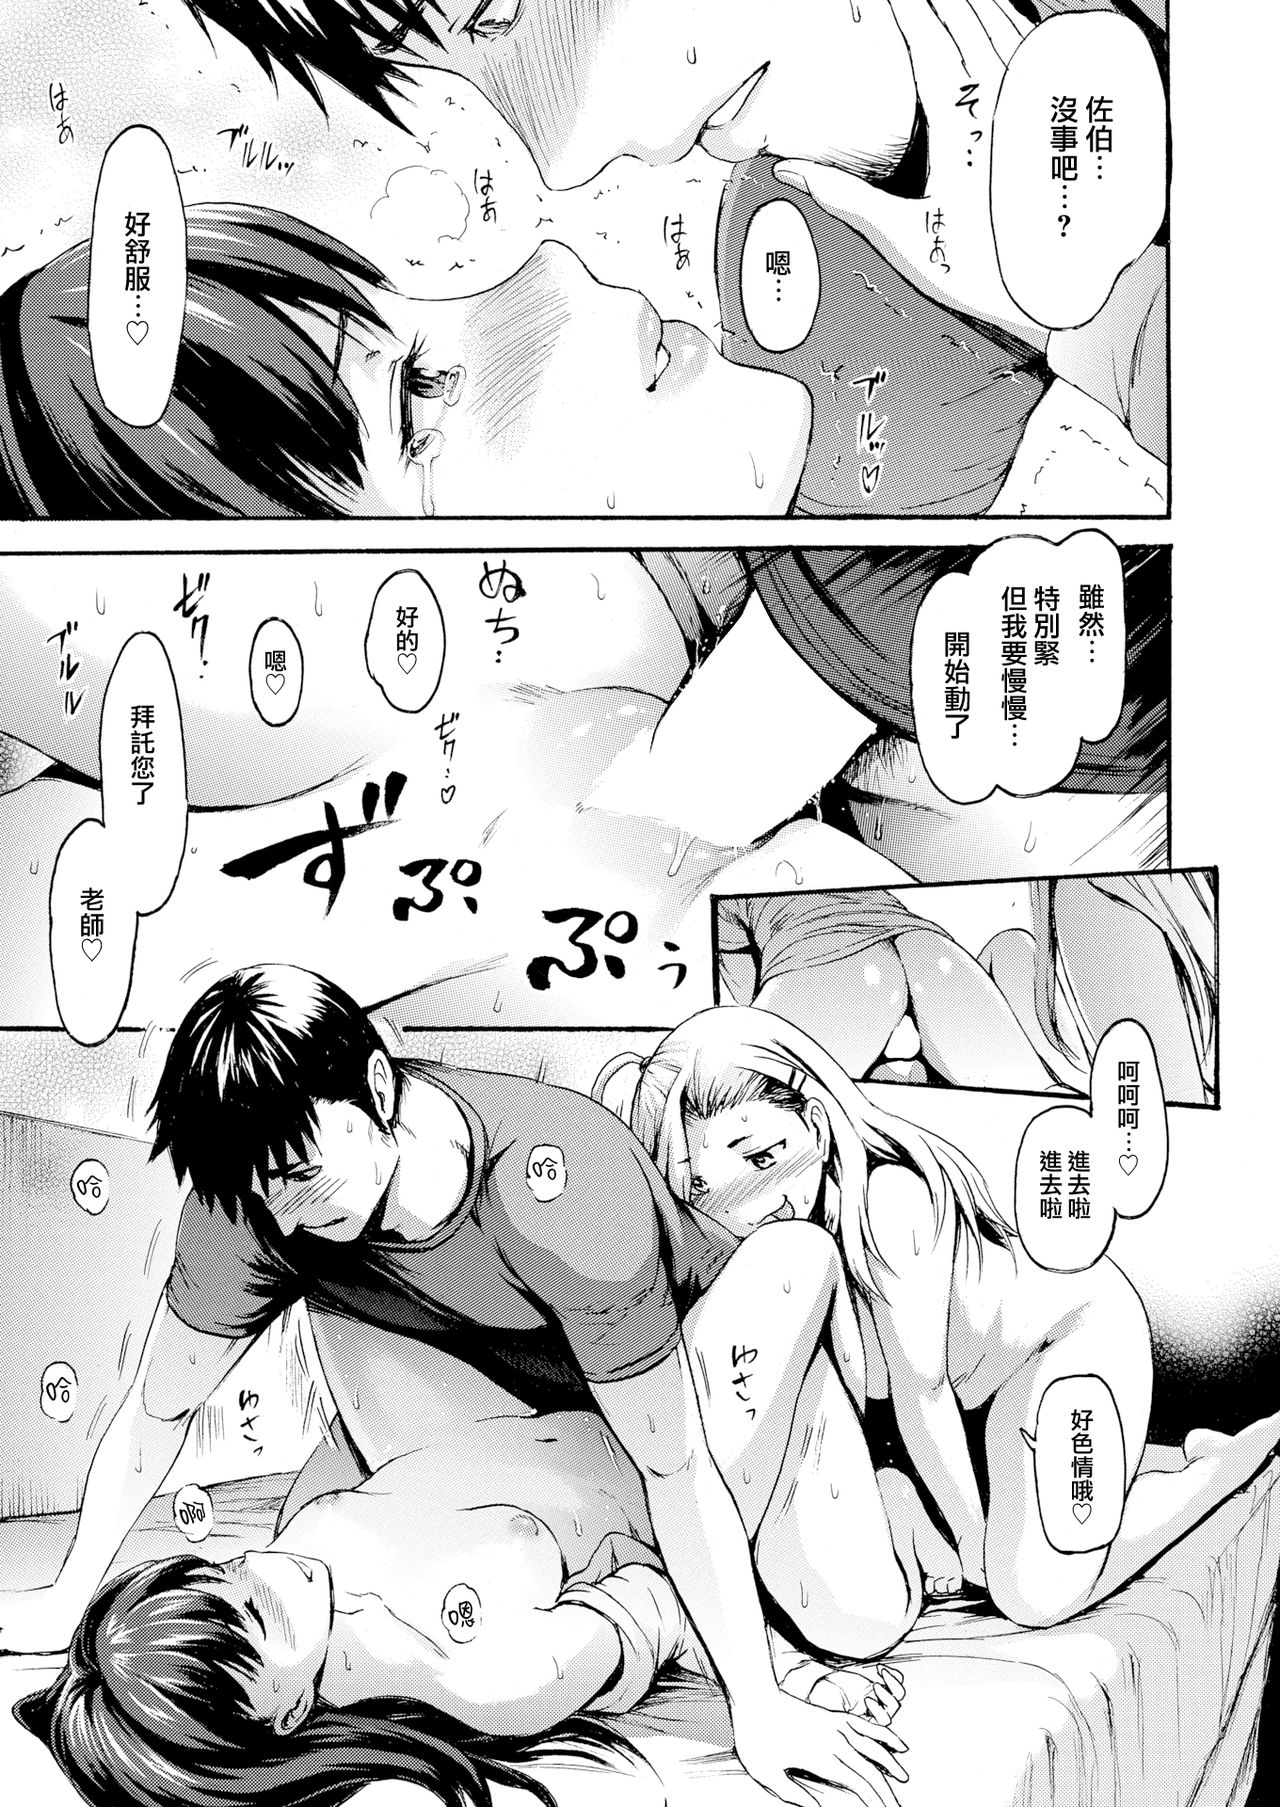 [E-Musu Aki] Dokkiri Mate - Do You Wanna SEX With Younger Pussy? (COMIC-X-EROS #61) [Chinese] [無邪気漢化組] [Digital] [いーむす・アキ] どっきりメイト (コミックゼロス #61) [中国翻訳] [DL版]